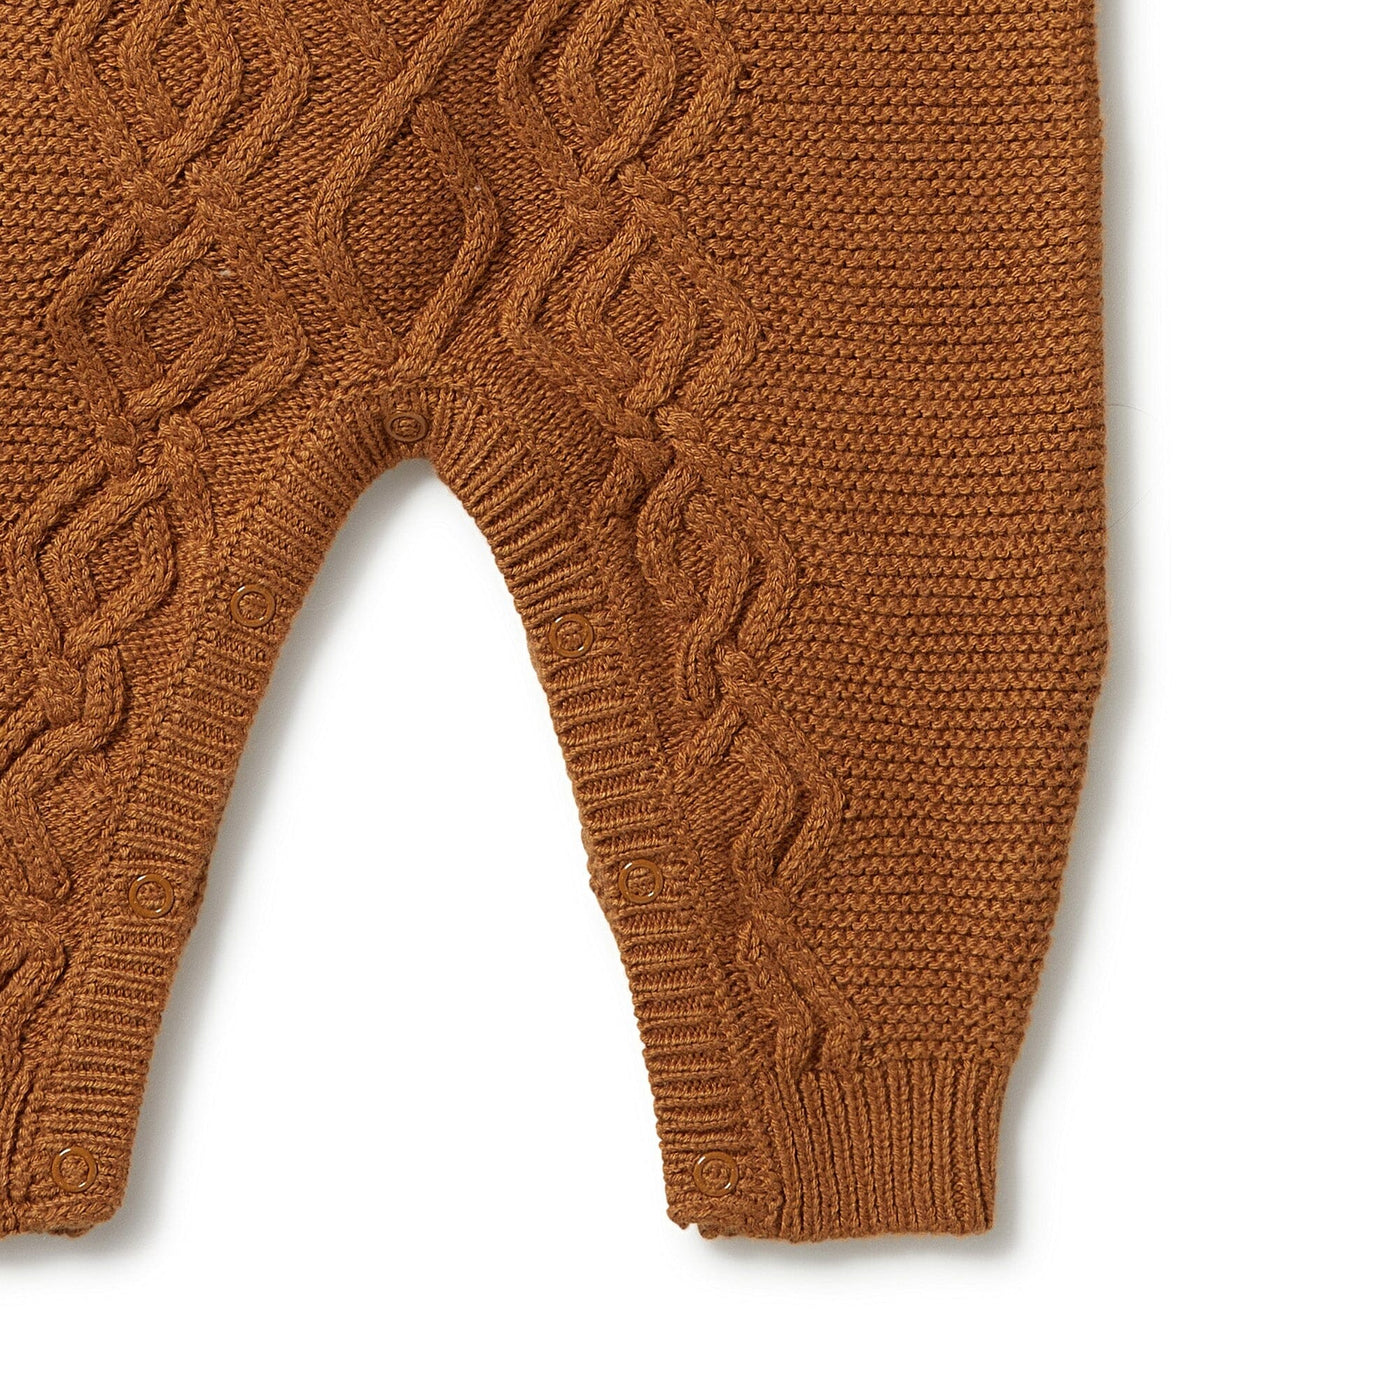 Knitted Cable Growsuit - Spice Growsuit Wilson & Frenchy 